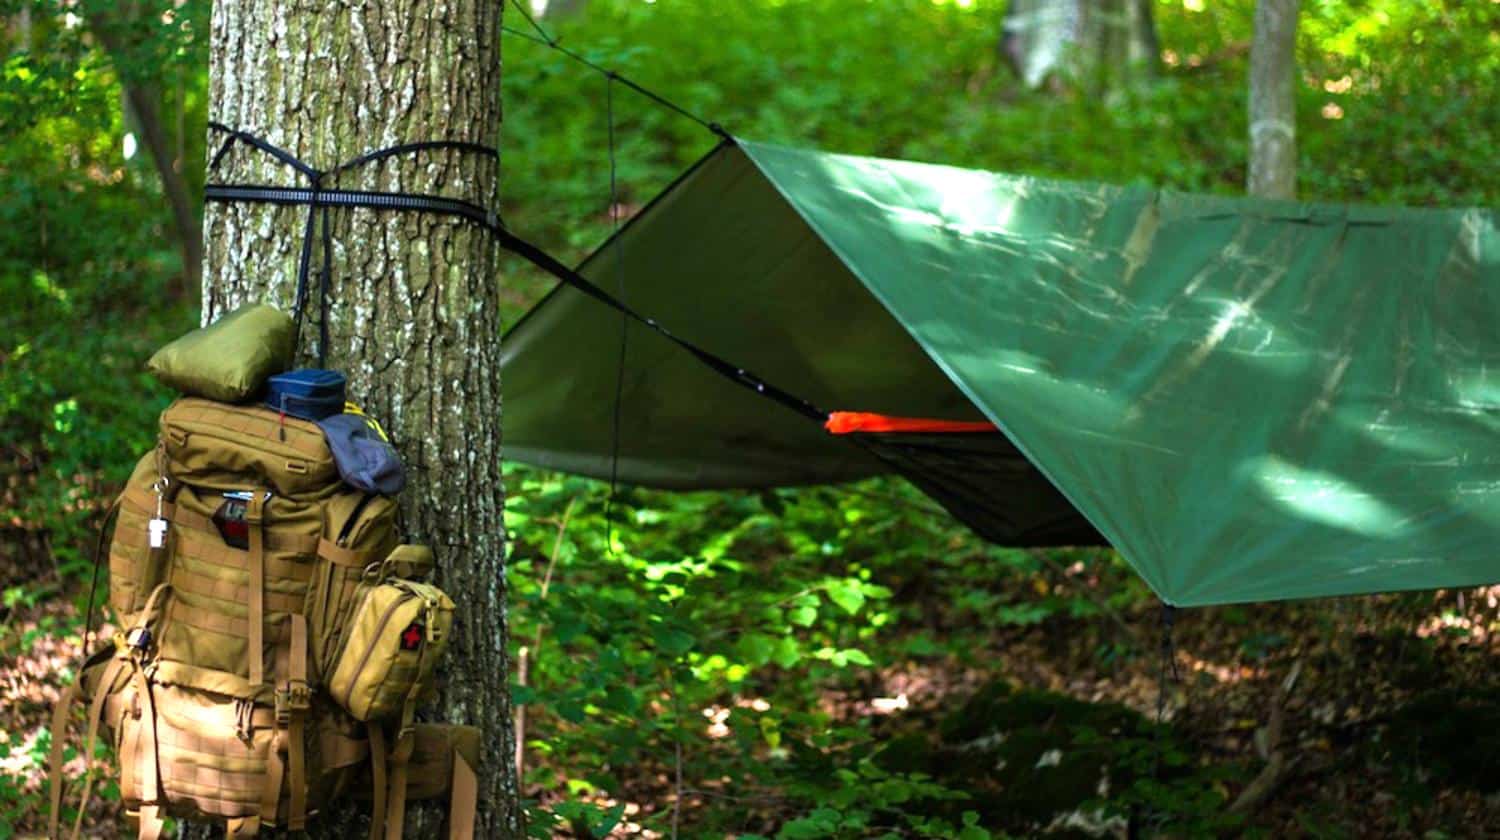 Outdoor hammock bushcraft | How To Build An Overnight Bushcraft Camp | Featured